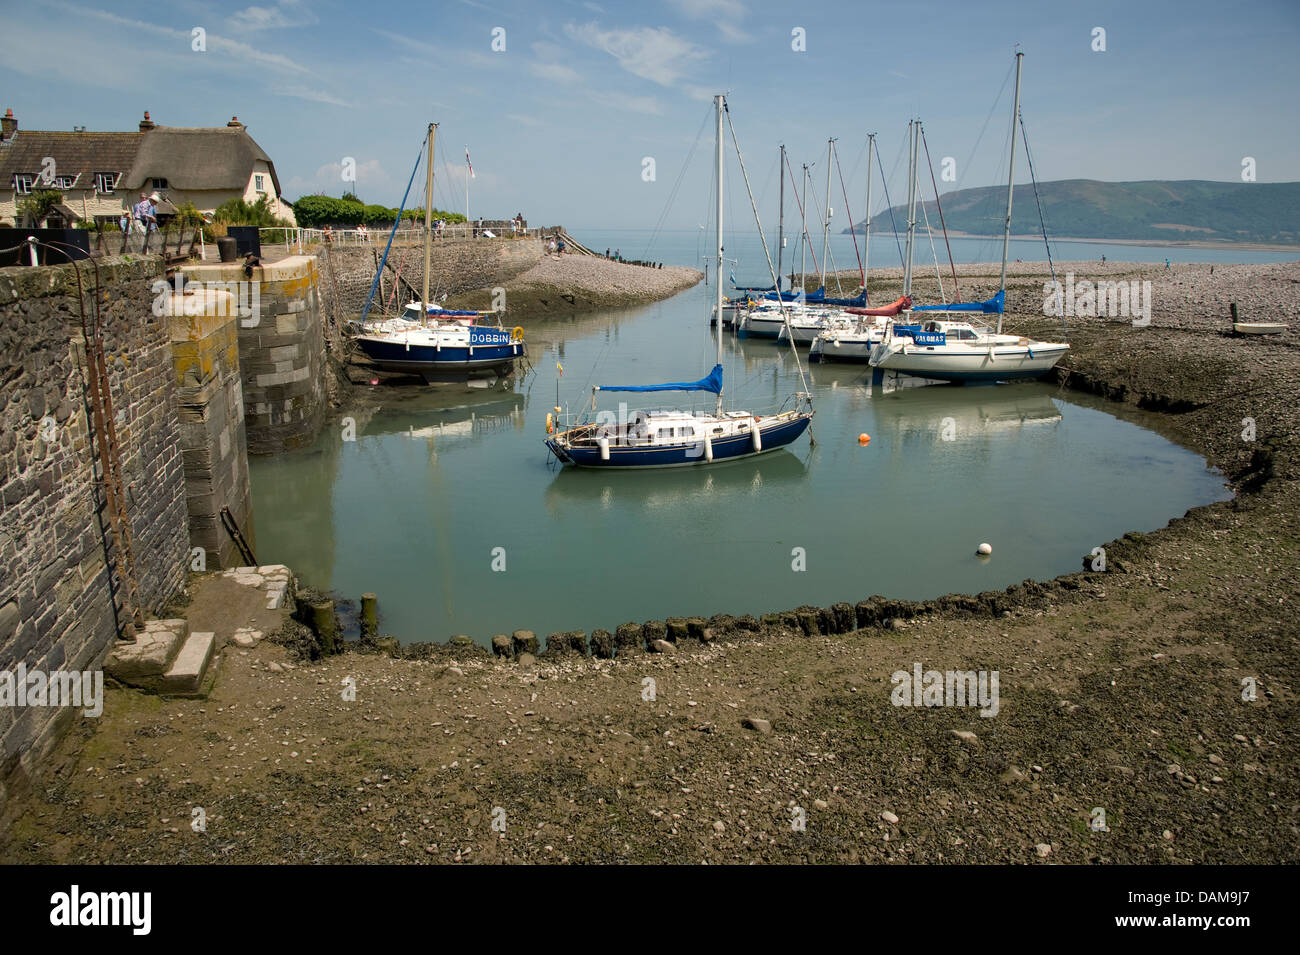 The pretty harbour at Porlock Weir, Somerset, England. Stock Photo